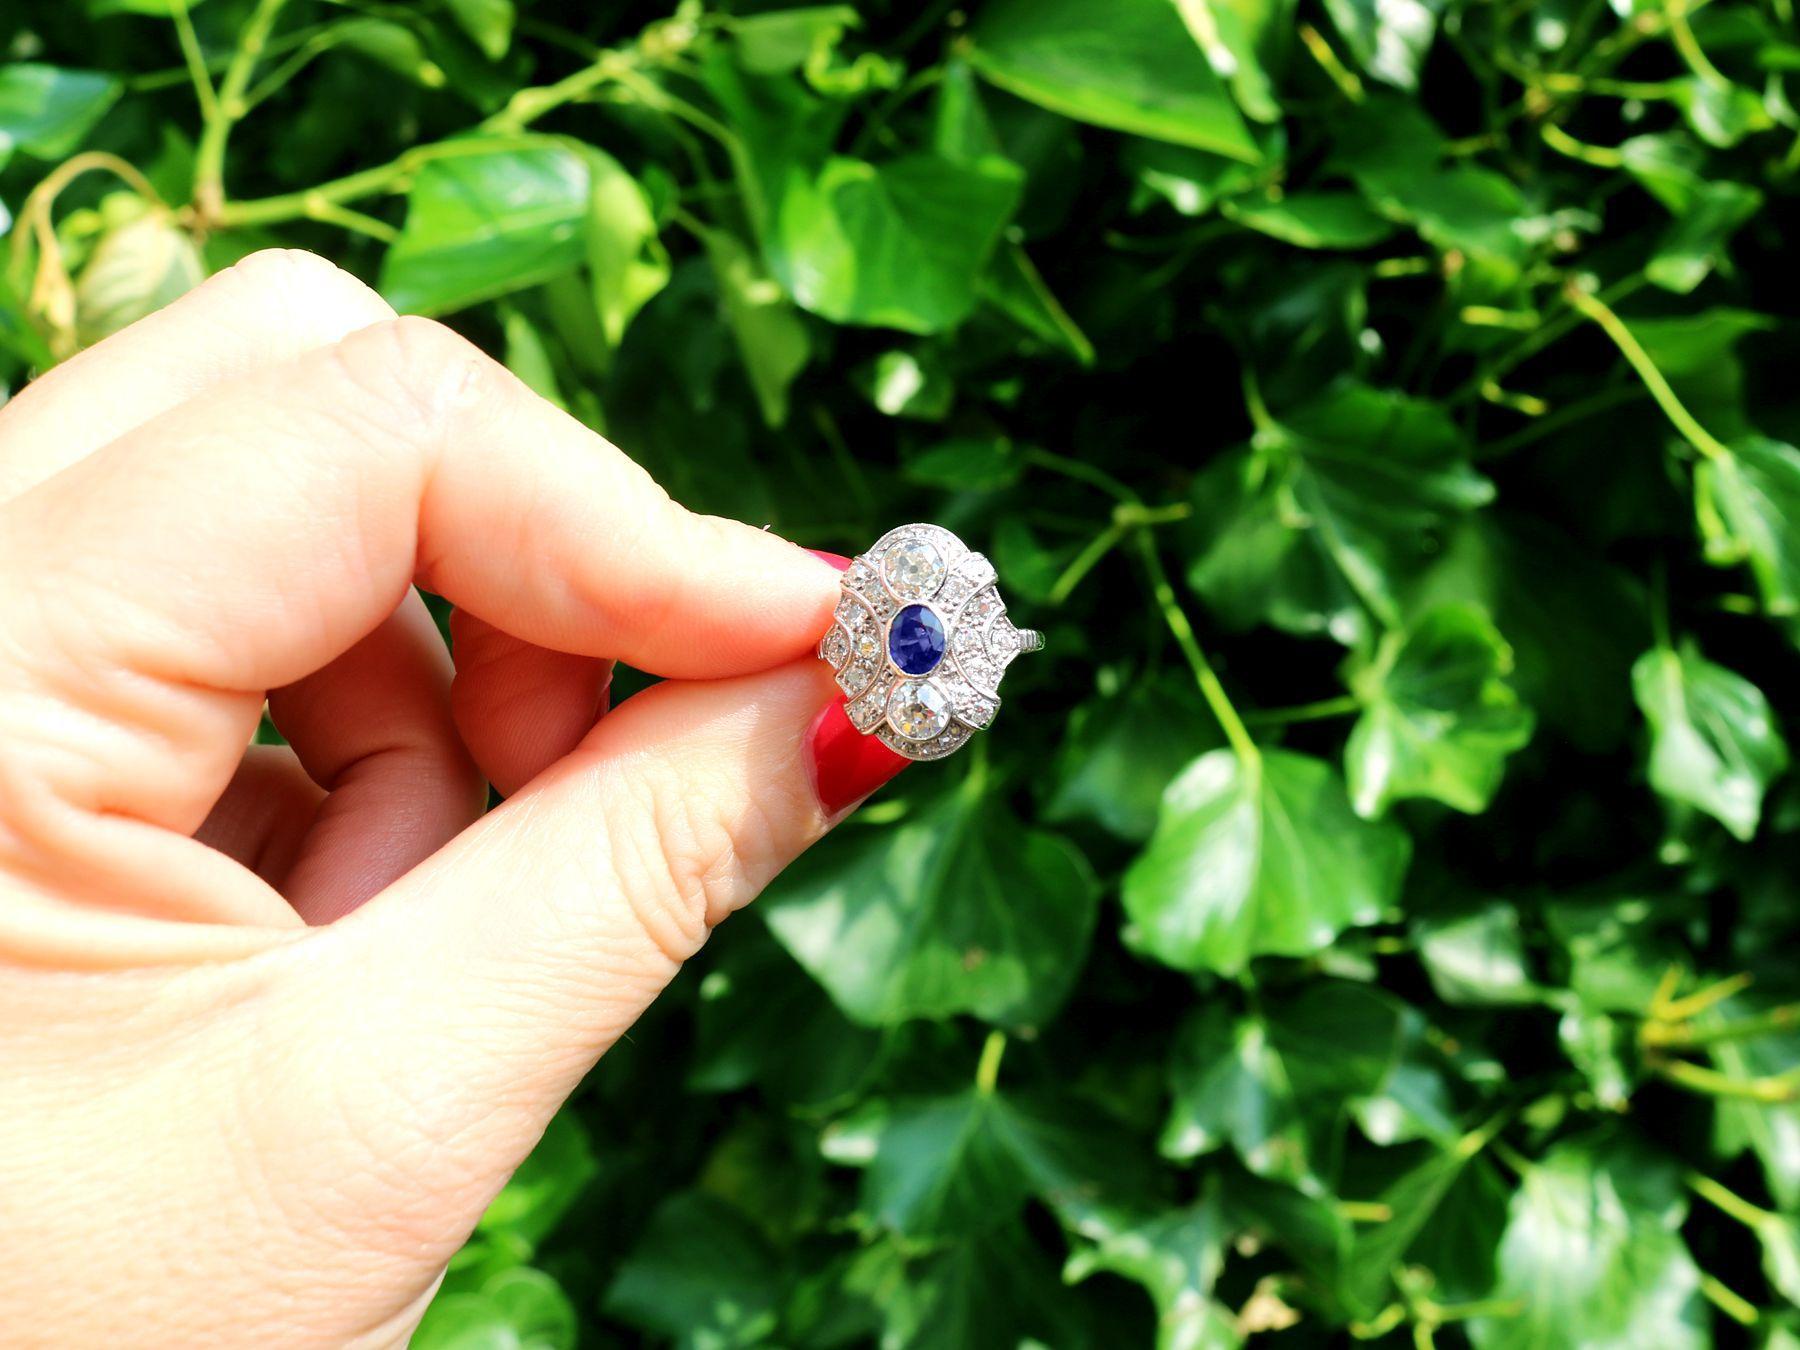 A stunning, fine and impressive antique 0.63 carat blue sapphire and 1.64 carat diamond, 18 karat white gold cocktail ring; part of our diverse antique jewelry collections

This stunning, fine and impressive blue sapphire and diamond ring has been